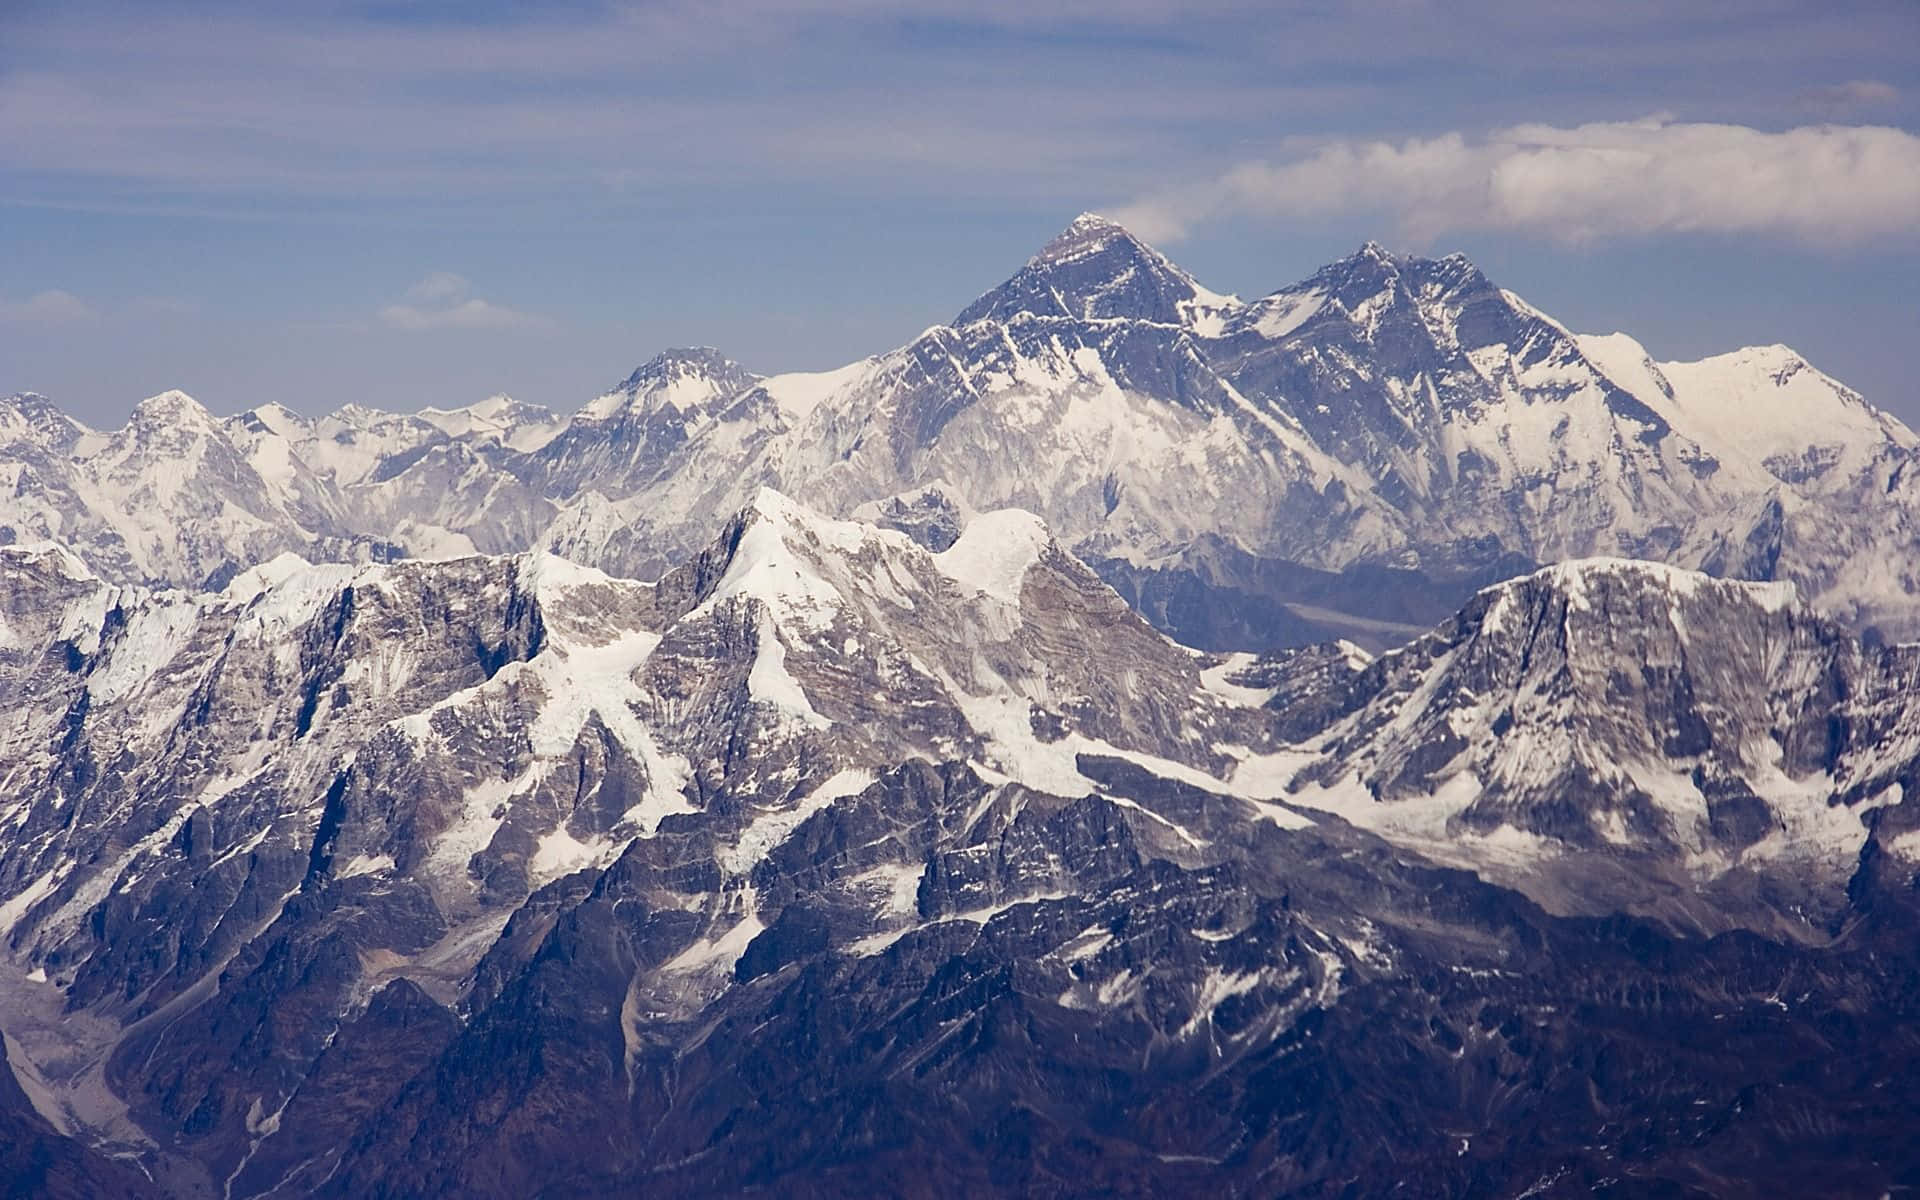 Take in the spectacular beauty of the Himalaya mountains